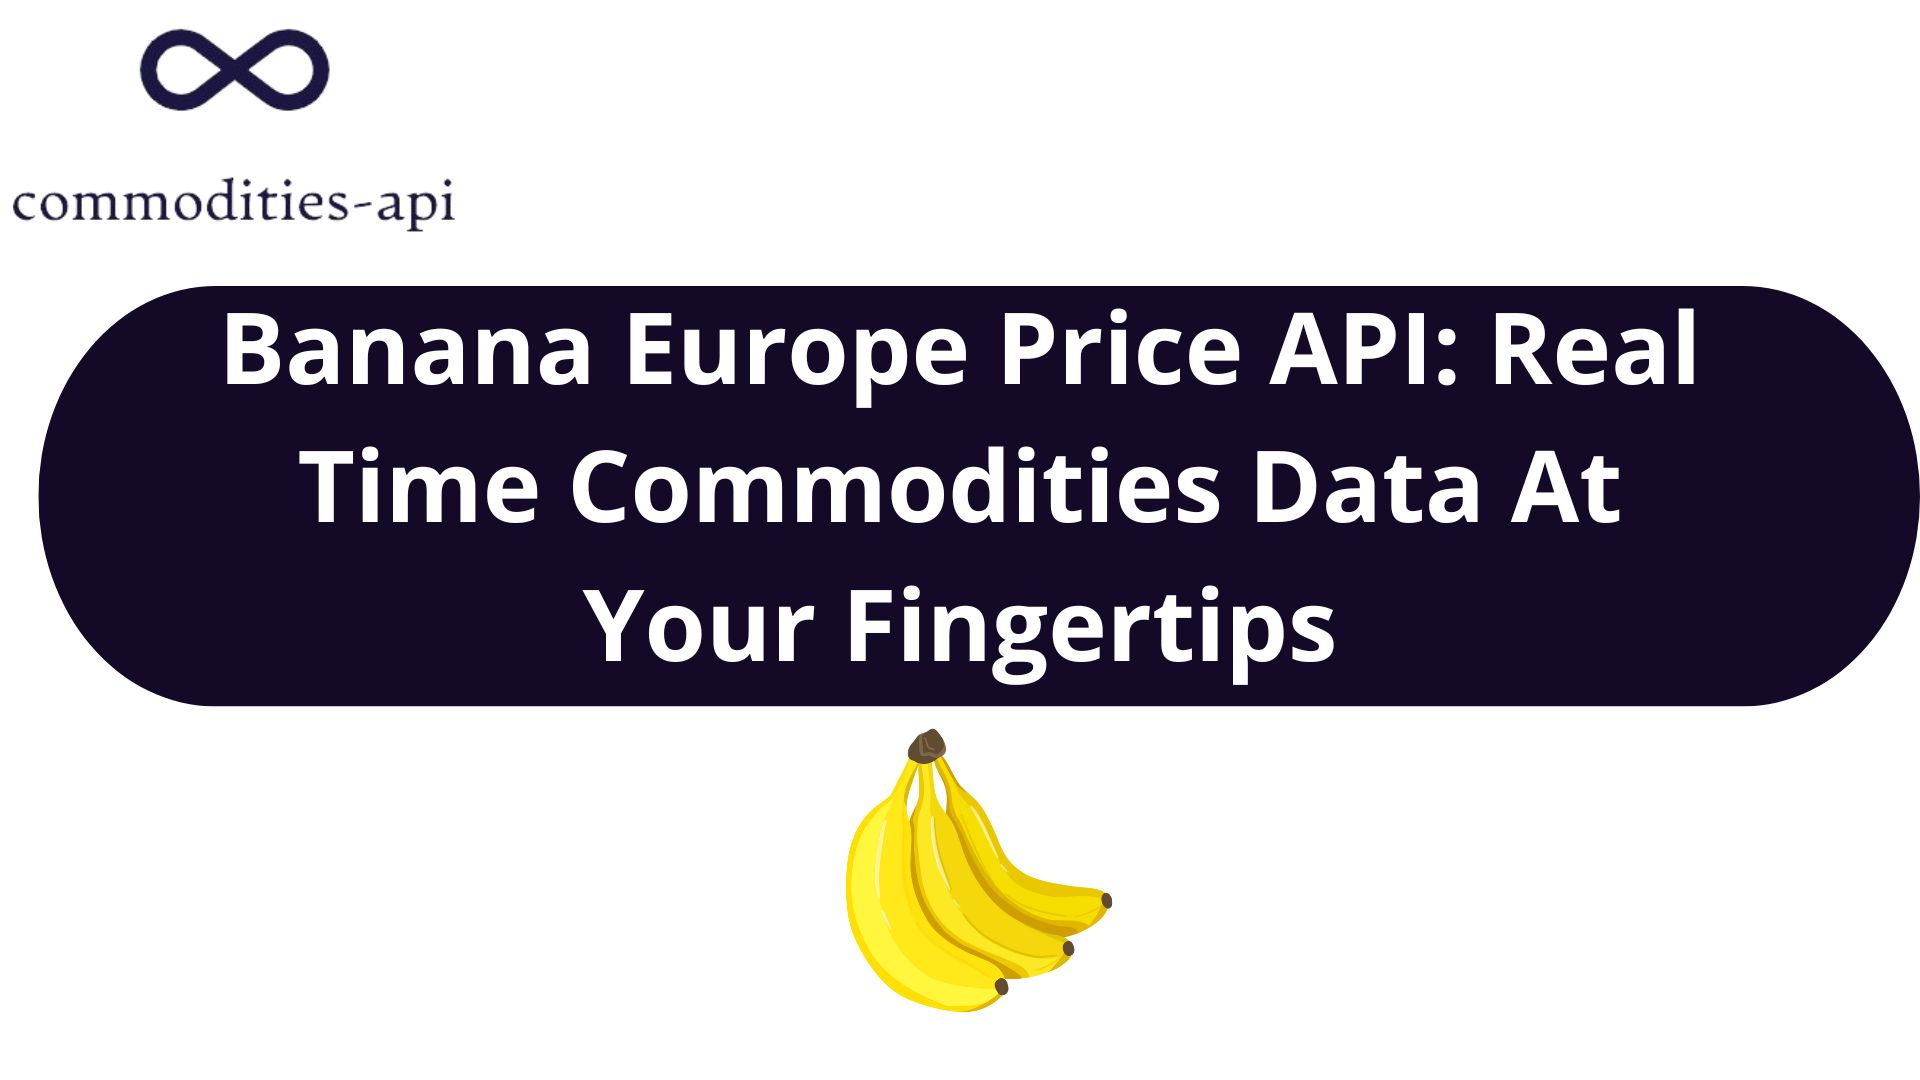 Banana Europe Price API: Real Time Commodities Data At Your Fingertips